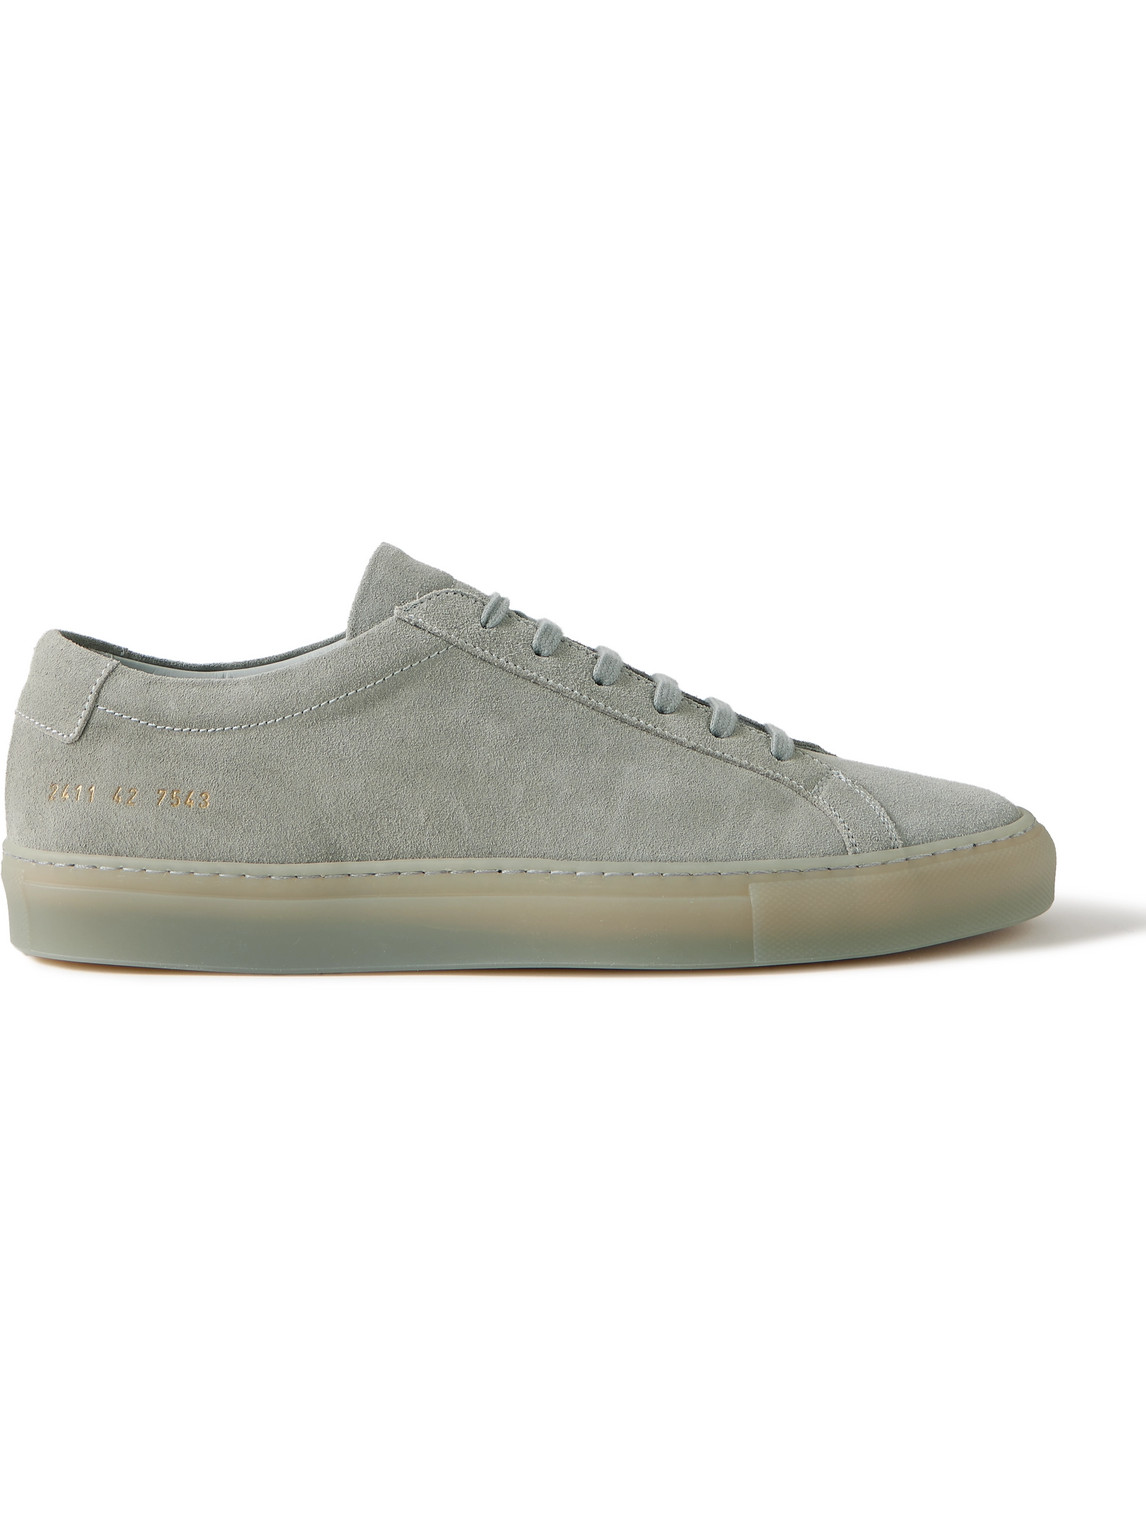 Shop Common Projects Original Achilles Suede Sneakers In Gray